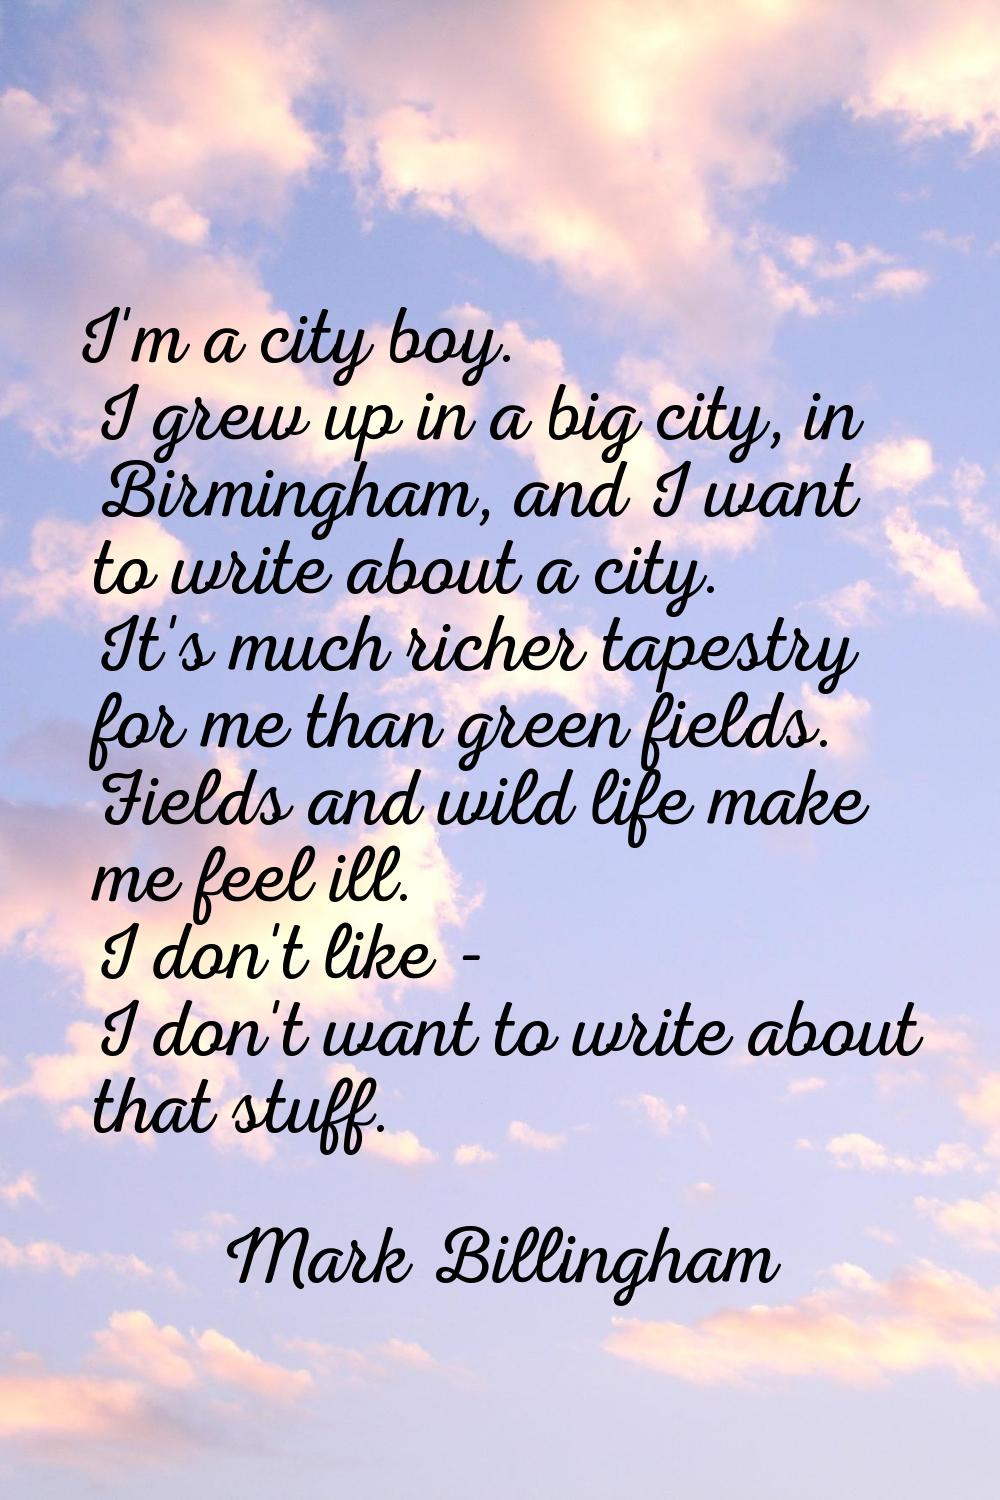 I'm a city boy. I grew up in a big city, in Birmingham, and I want to write about a city. It's much